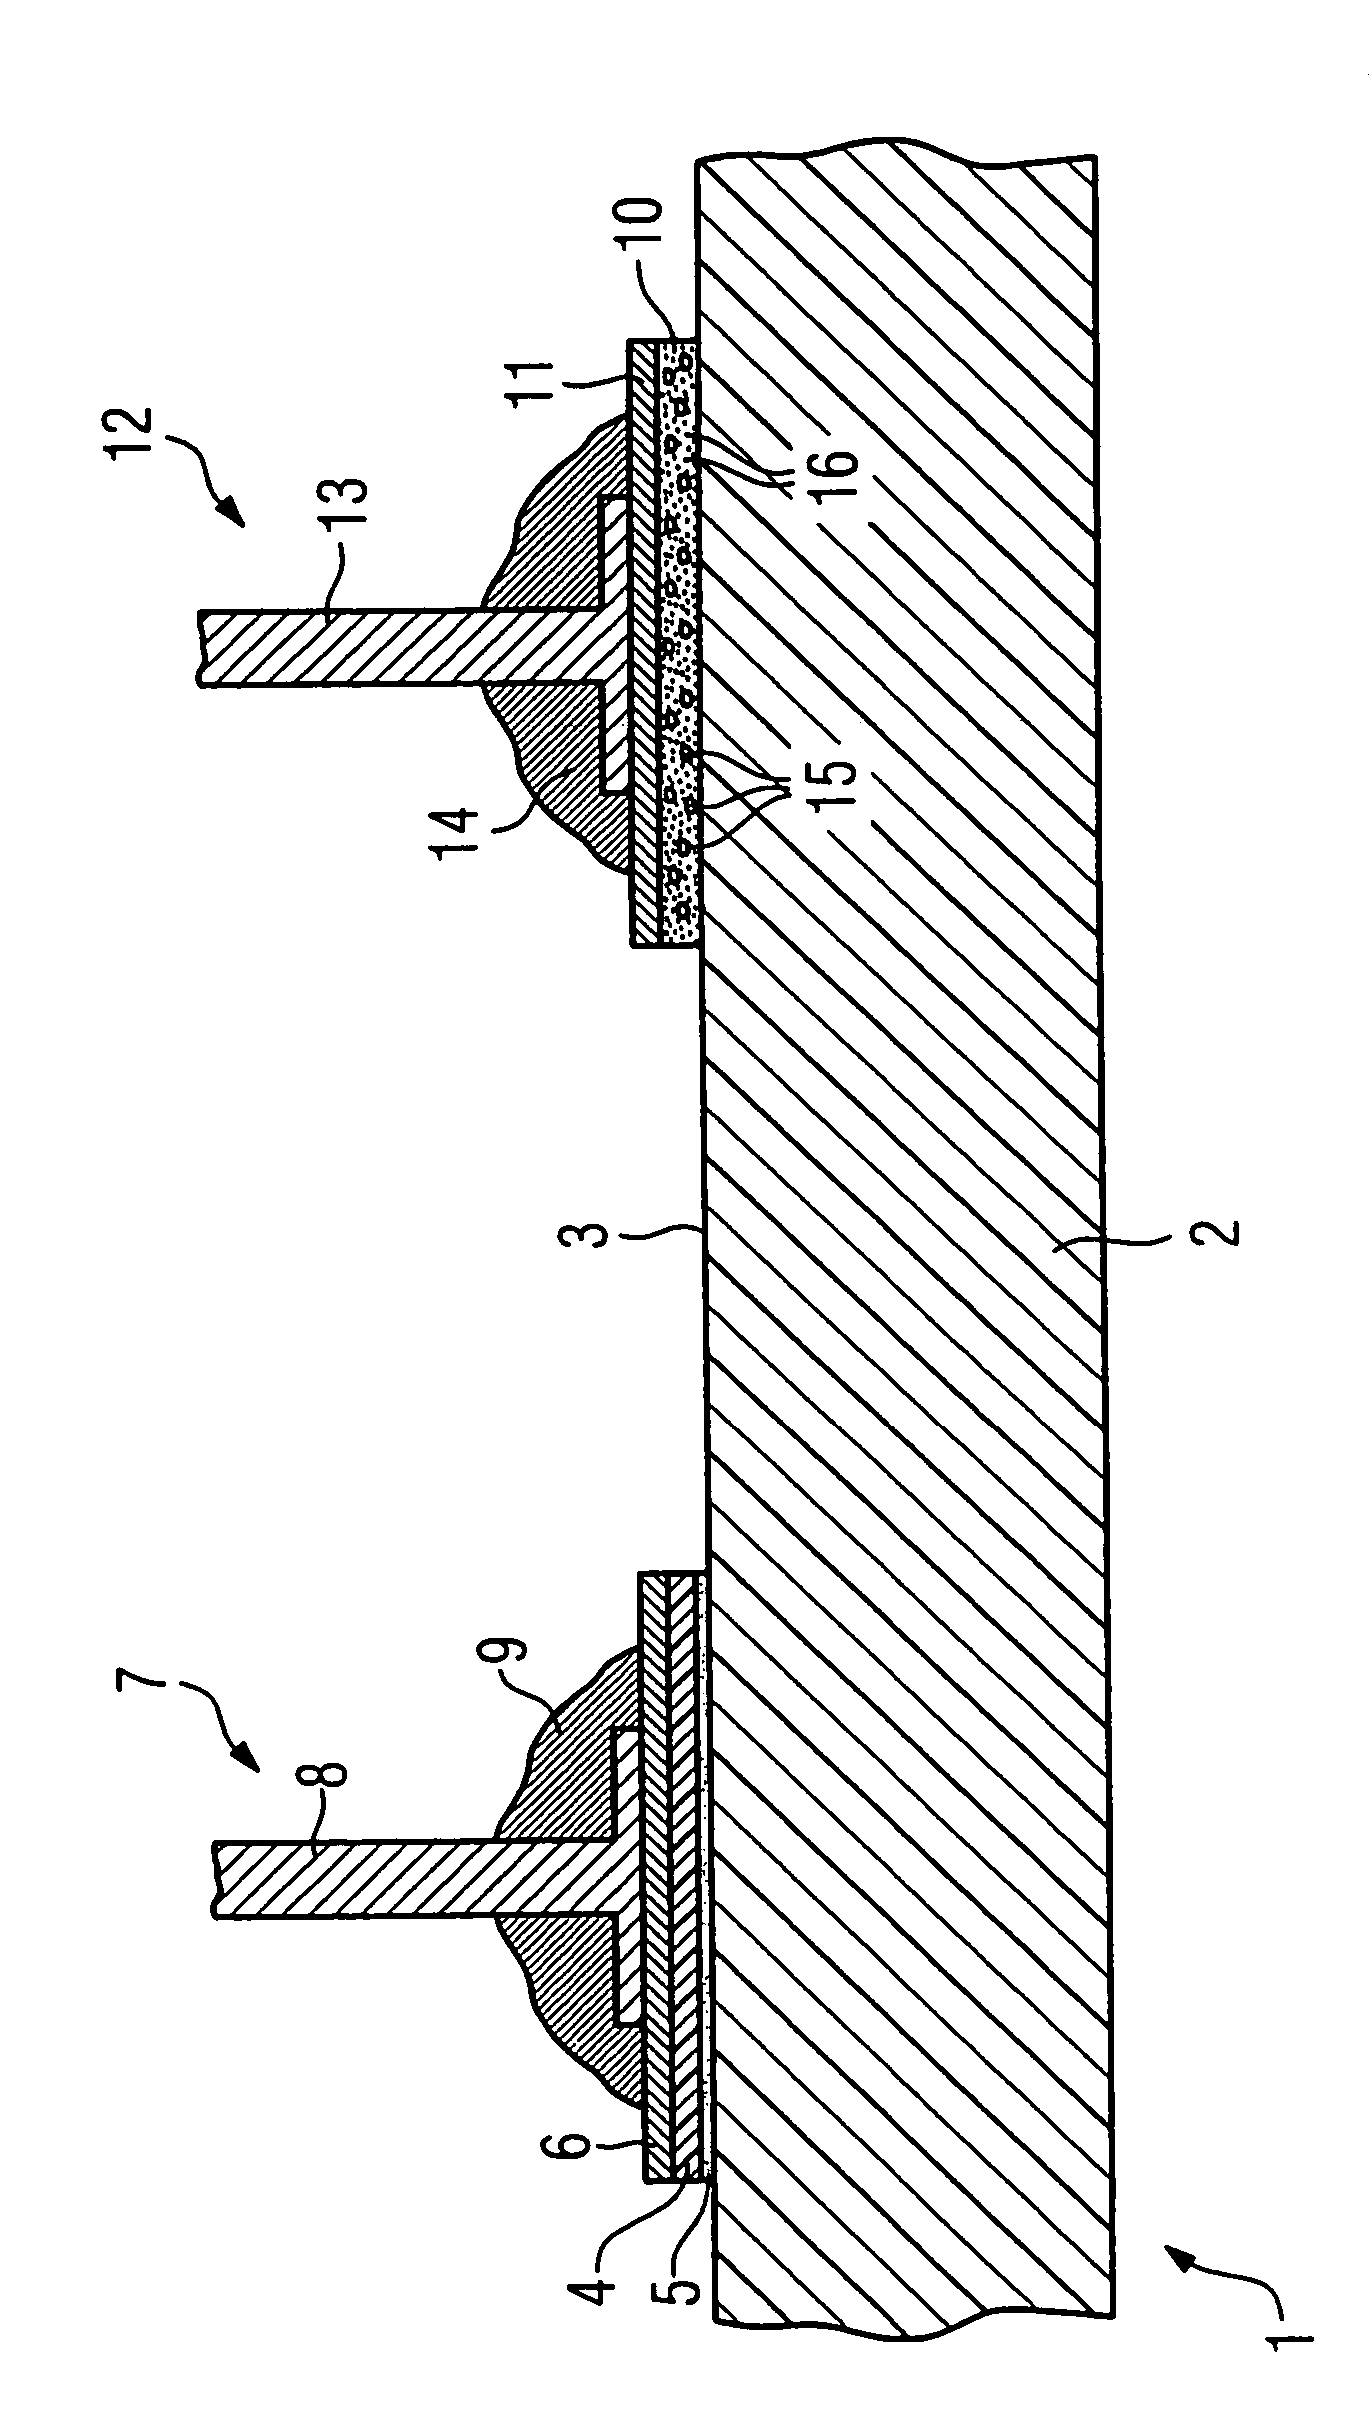 Plastic component having heat resistant hardened resin at thermal-attachment connection points